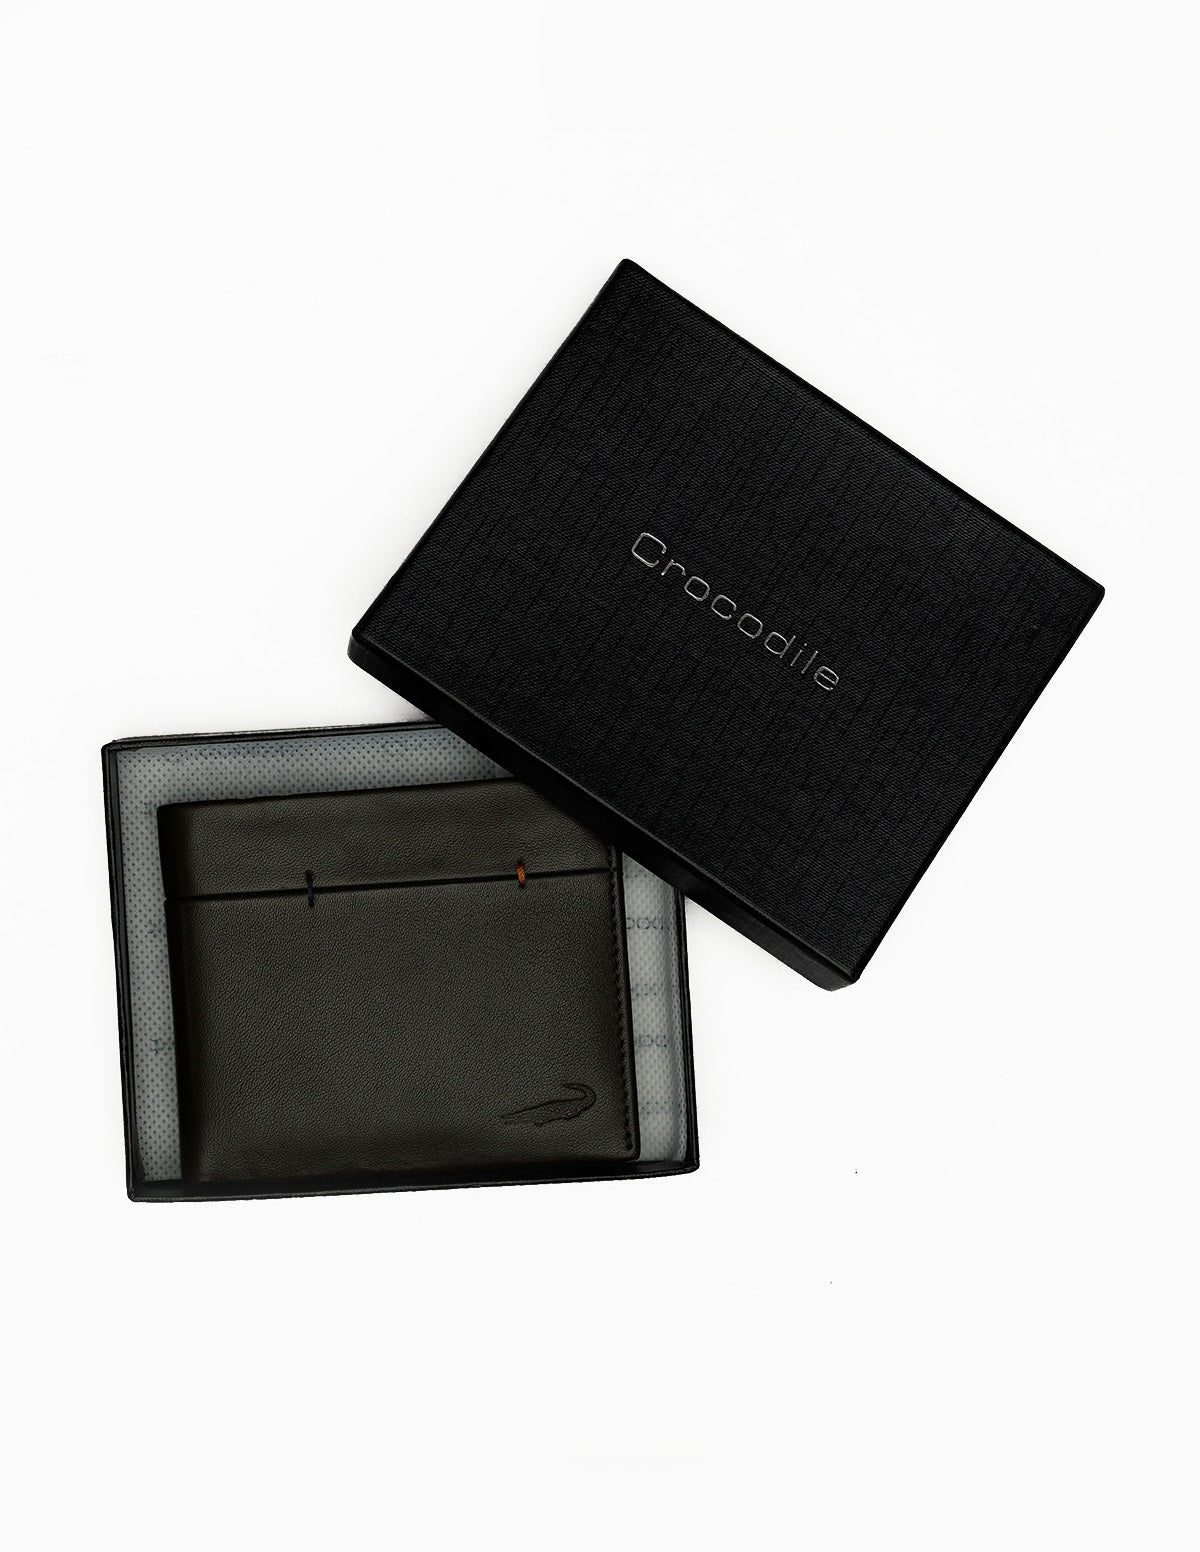 Bifold Leather wallet with coin pocket - Dark Green